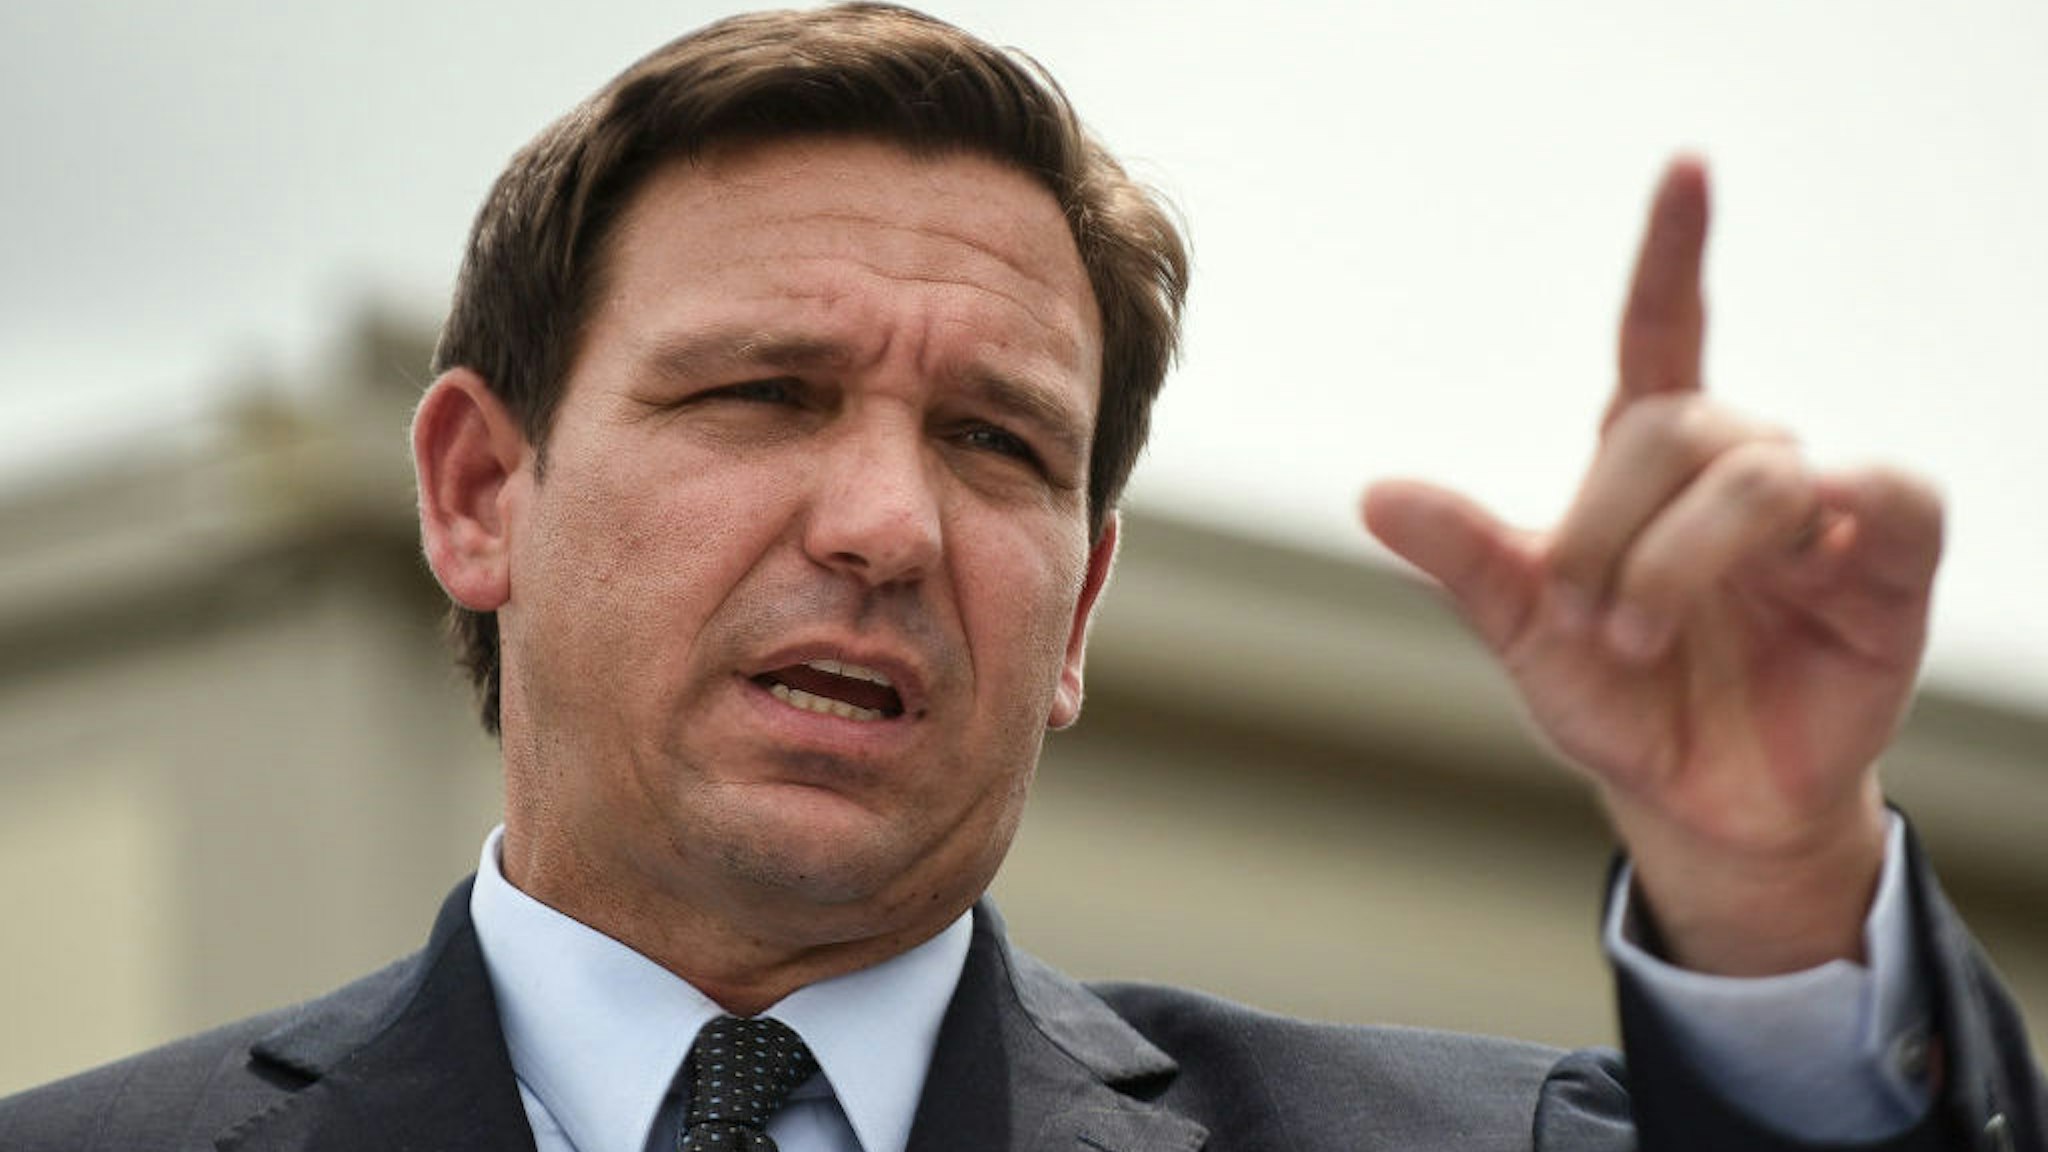 ORLANDO, FLORIDA, UNITED STATES - 2021/08/16: Florida Governor, Ron DeSantis holds a press conference to announce the opening of a monoclonal antibody treatment site to help COVID-19 patients recover at Camping World Stadium in Orlando. DeSantis stated that the site will offer the Regeneron treatment, and will operate 7 days a week, treating up to 320 patients a day. (Photo by Paul Hennessy/SOPA Images/LightRocket via Getty Images)